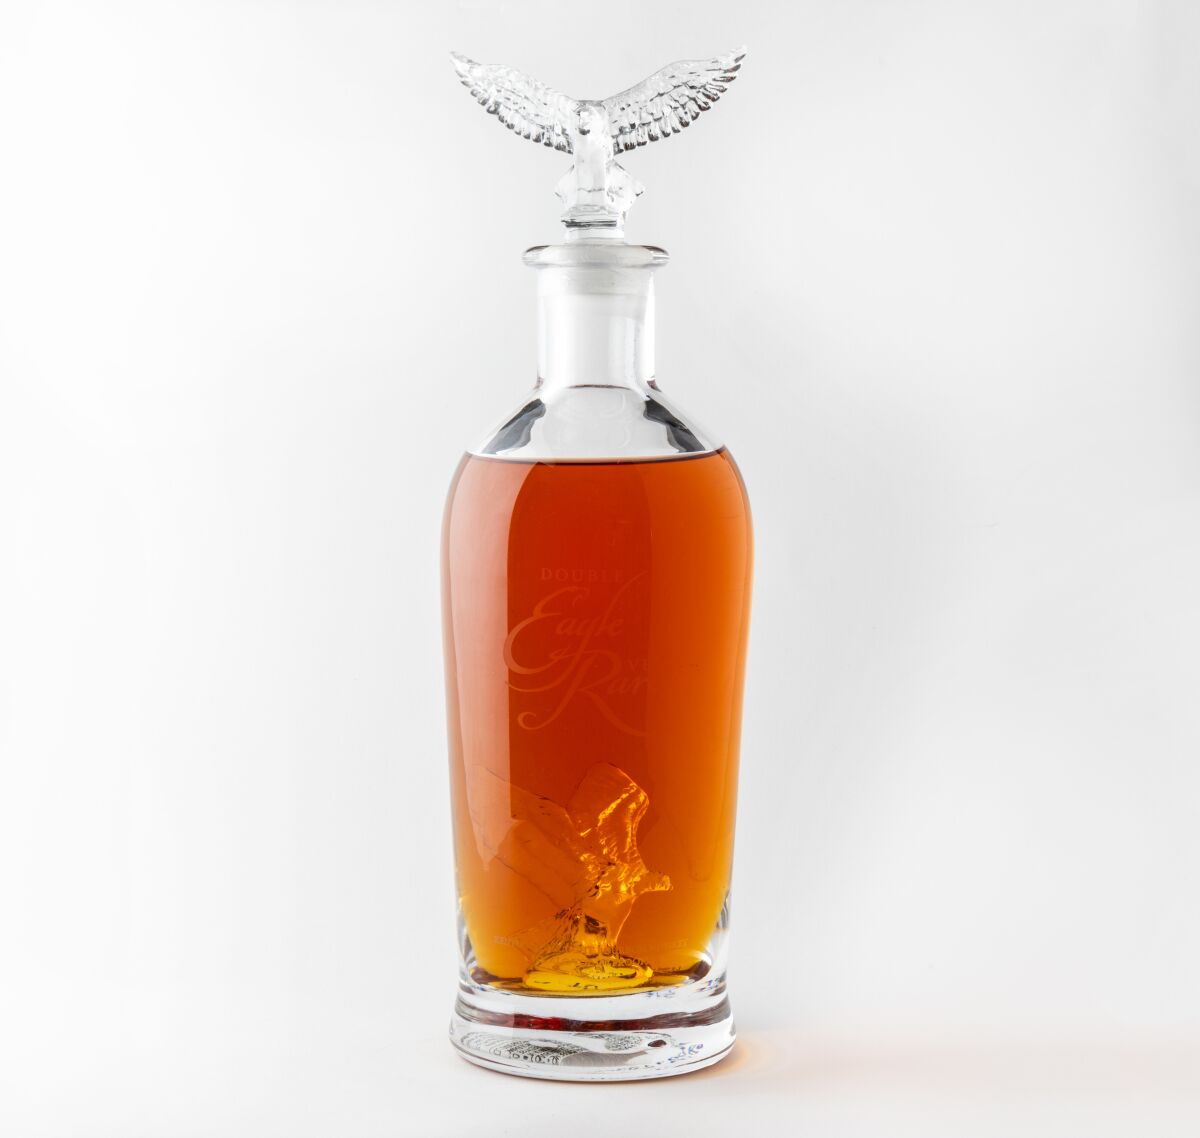 A glass bottle filled with brown bourbon and topped with a spread-wing eagle stopper. 